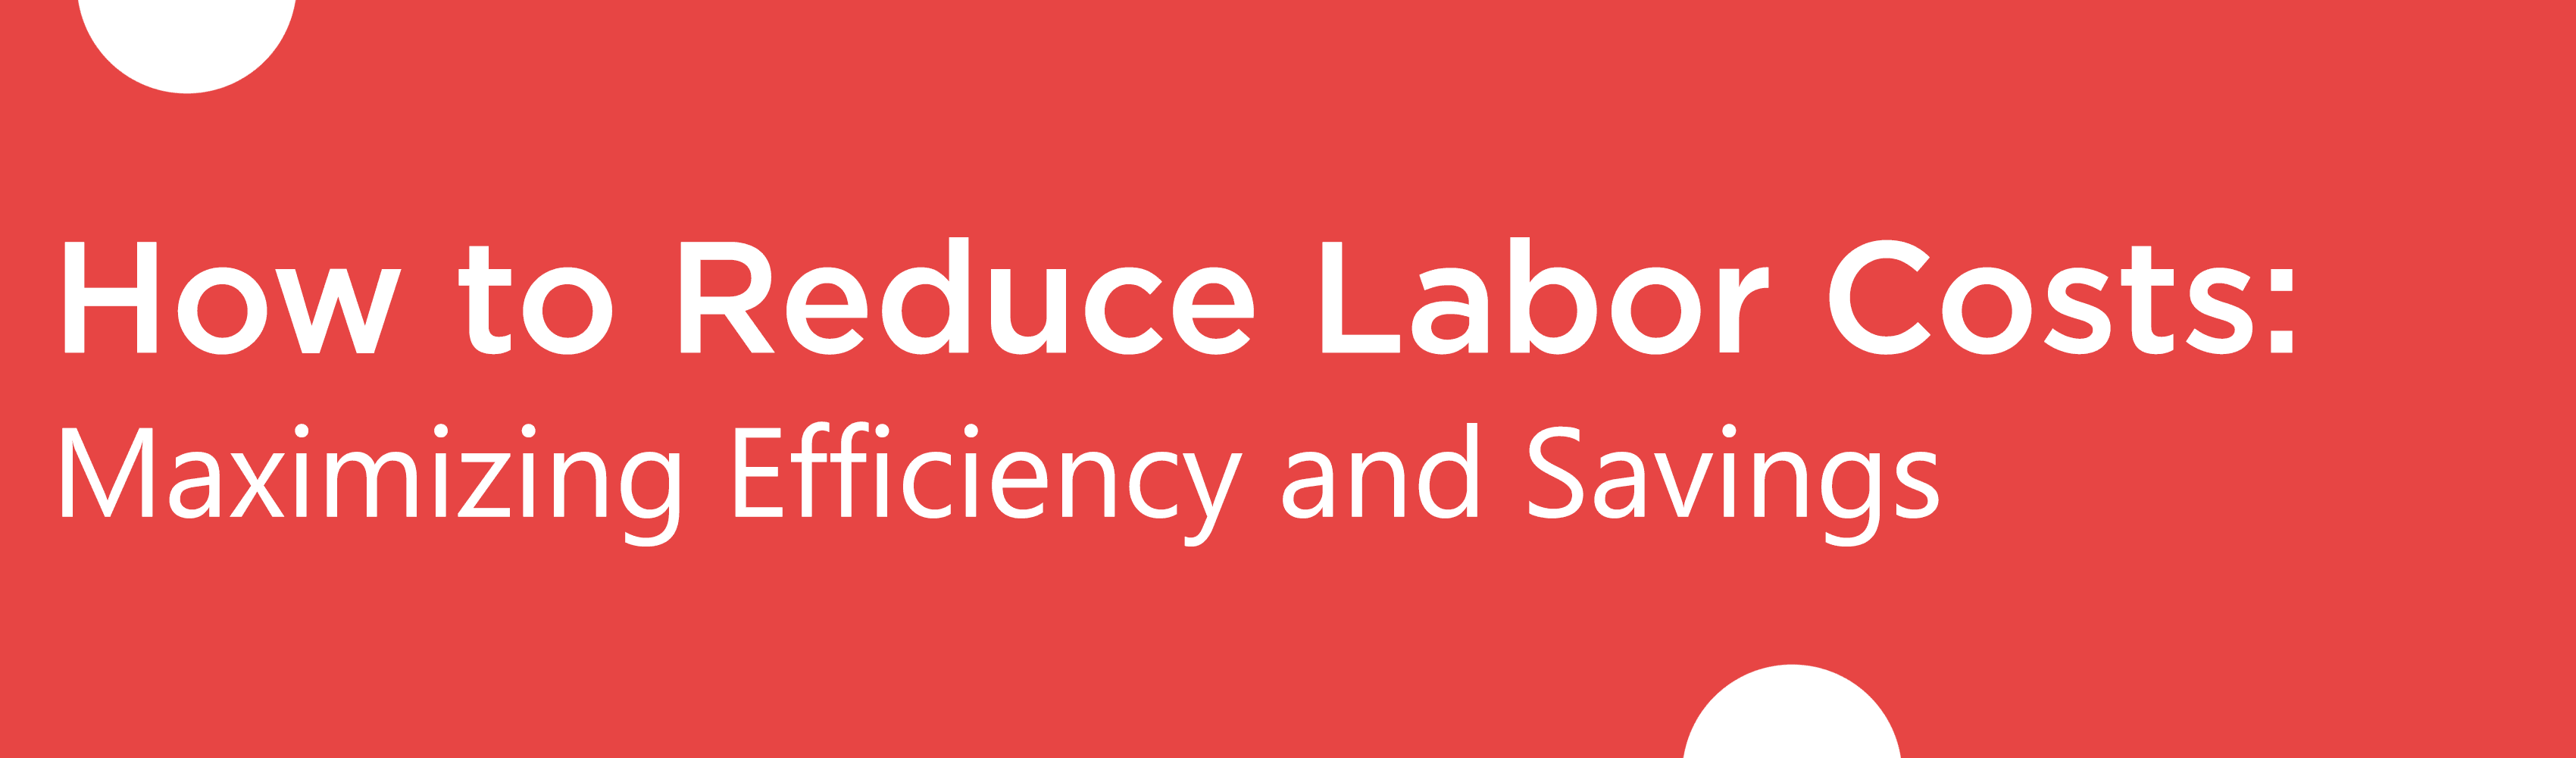 BLog banner 2 How to Reduce Labor Costs- Maximizing Efficiency and Savings